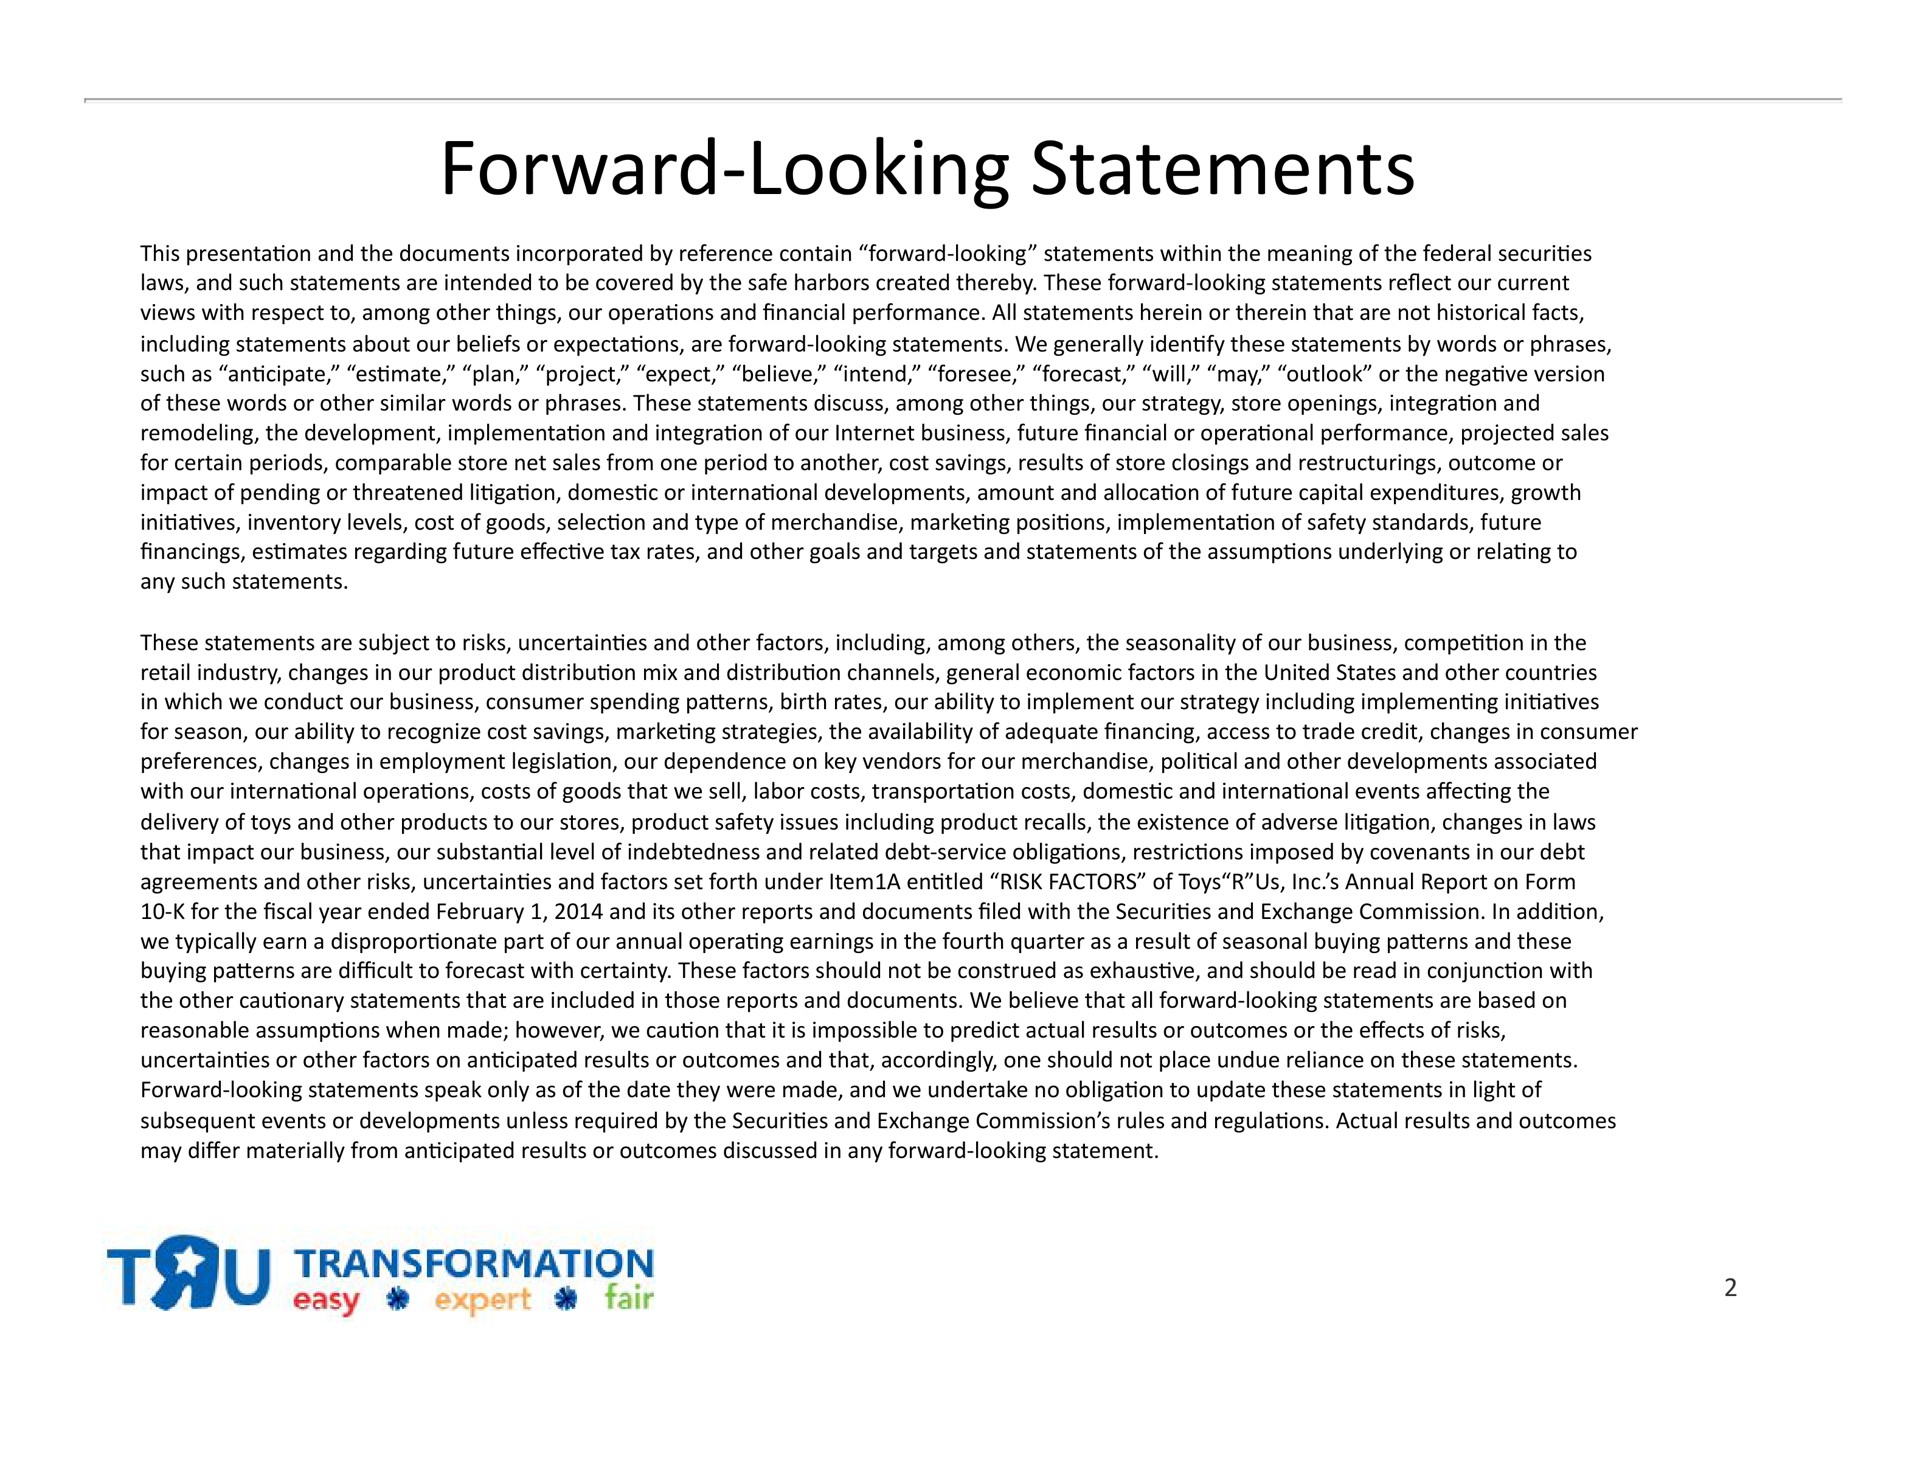 forward looking statements | Toys R Us